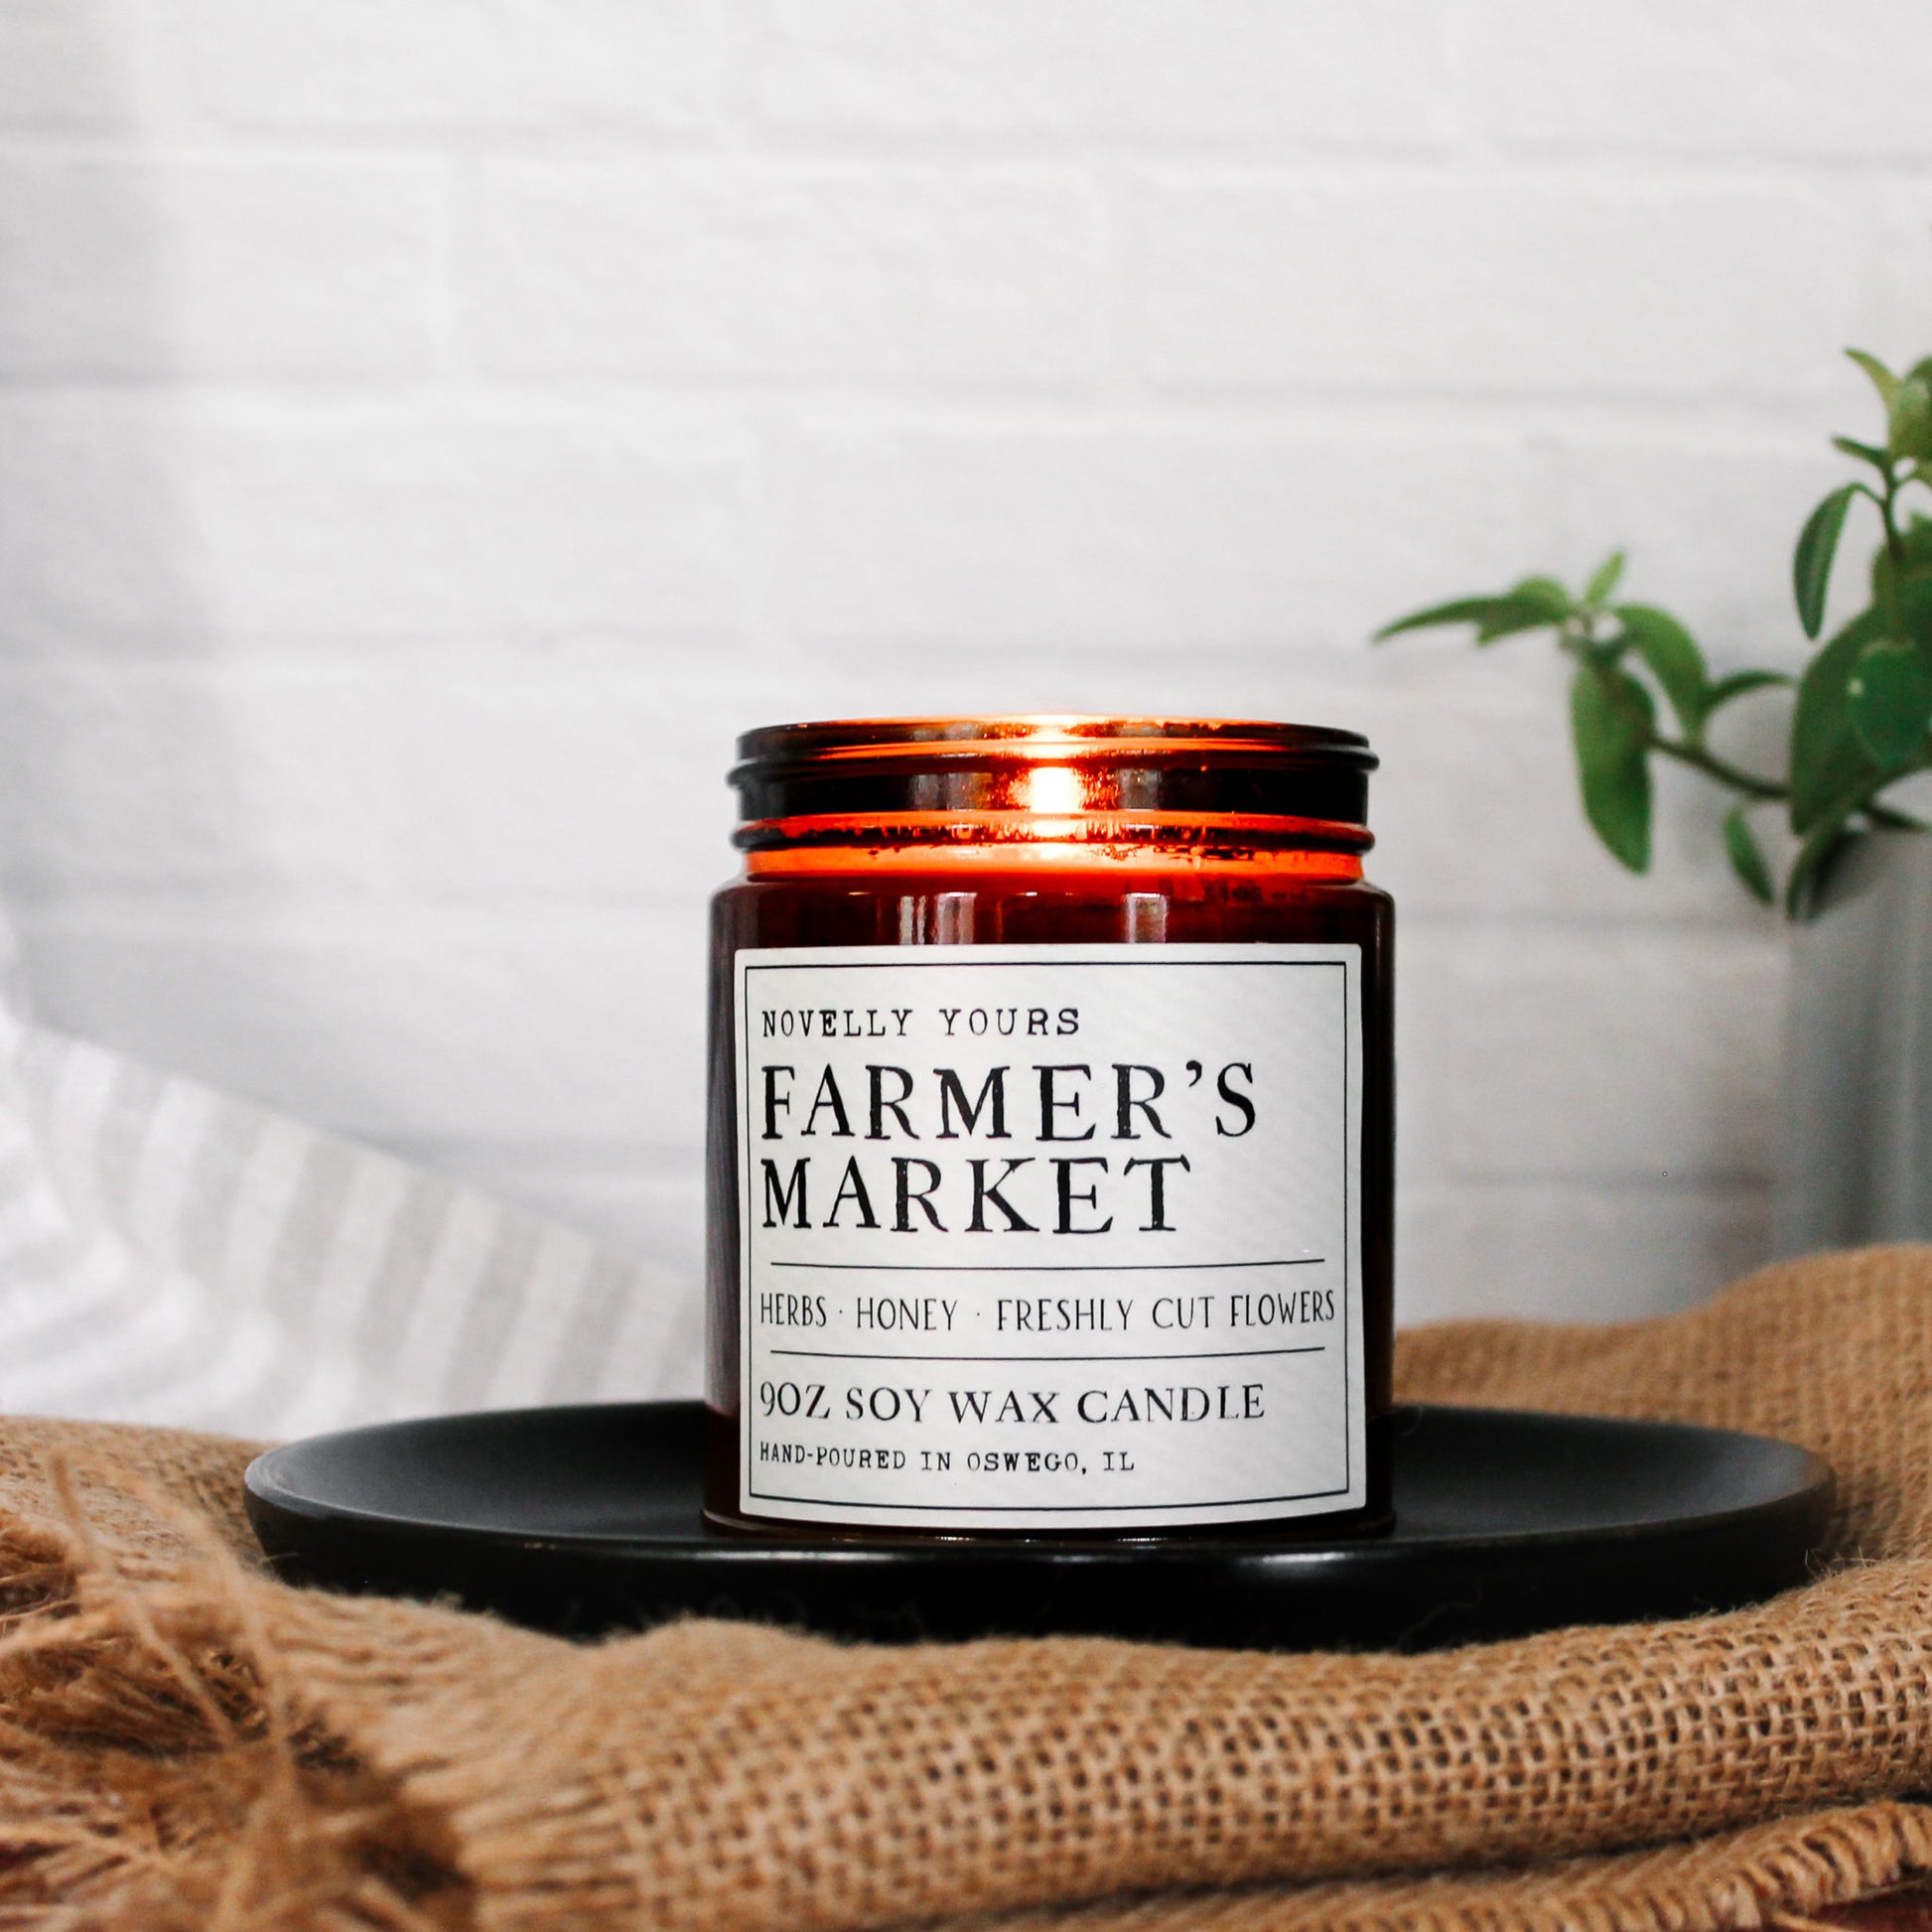 soy wax candle in amber jar called "Farmer's market" with rustic label aesthetic